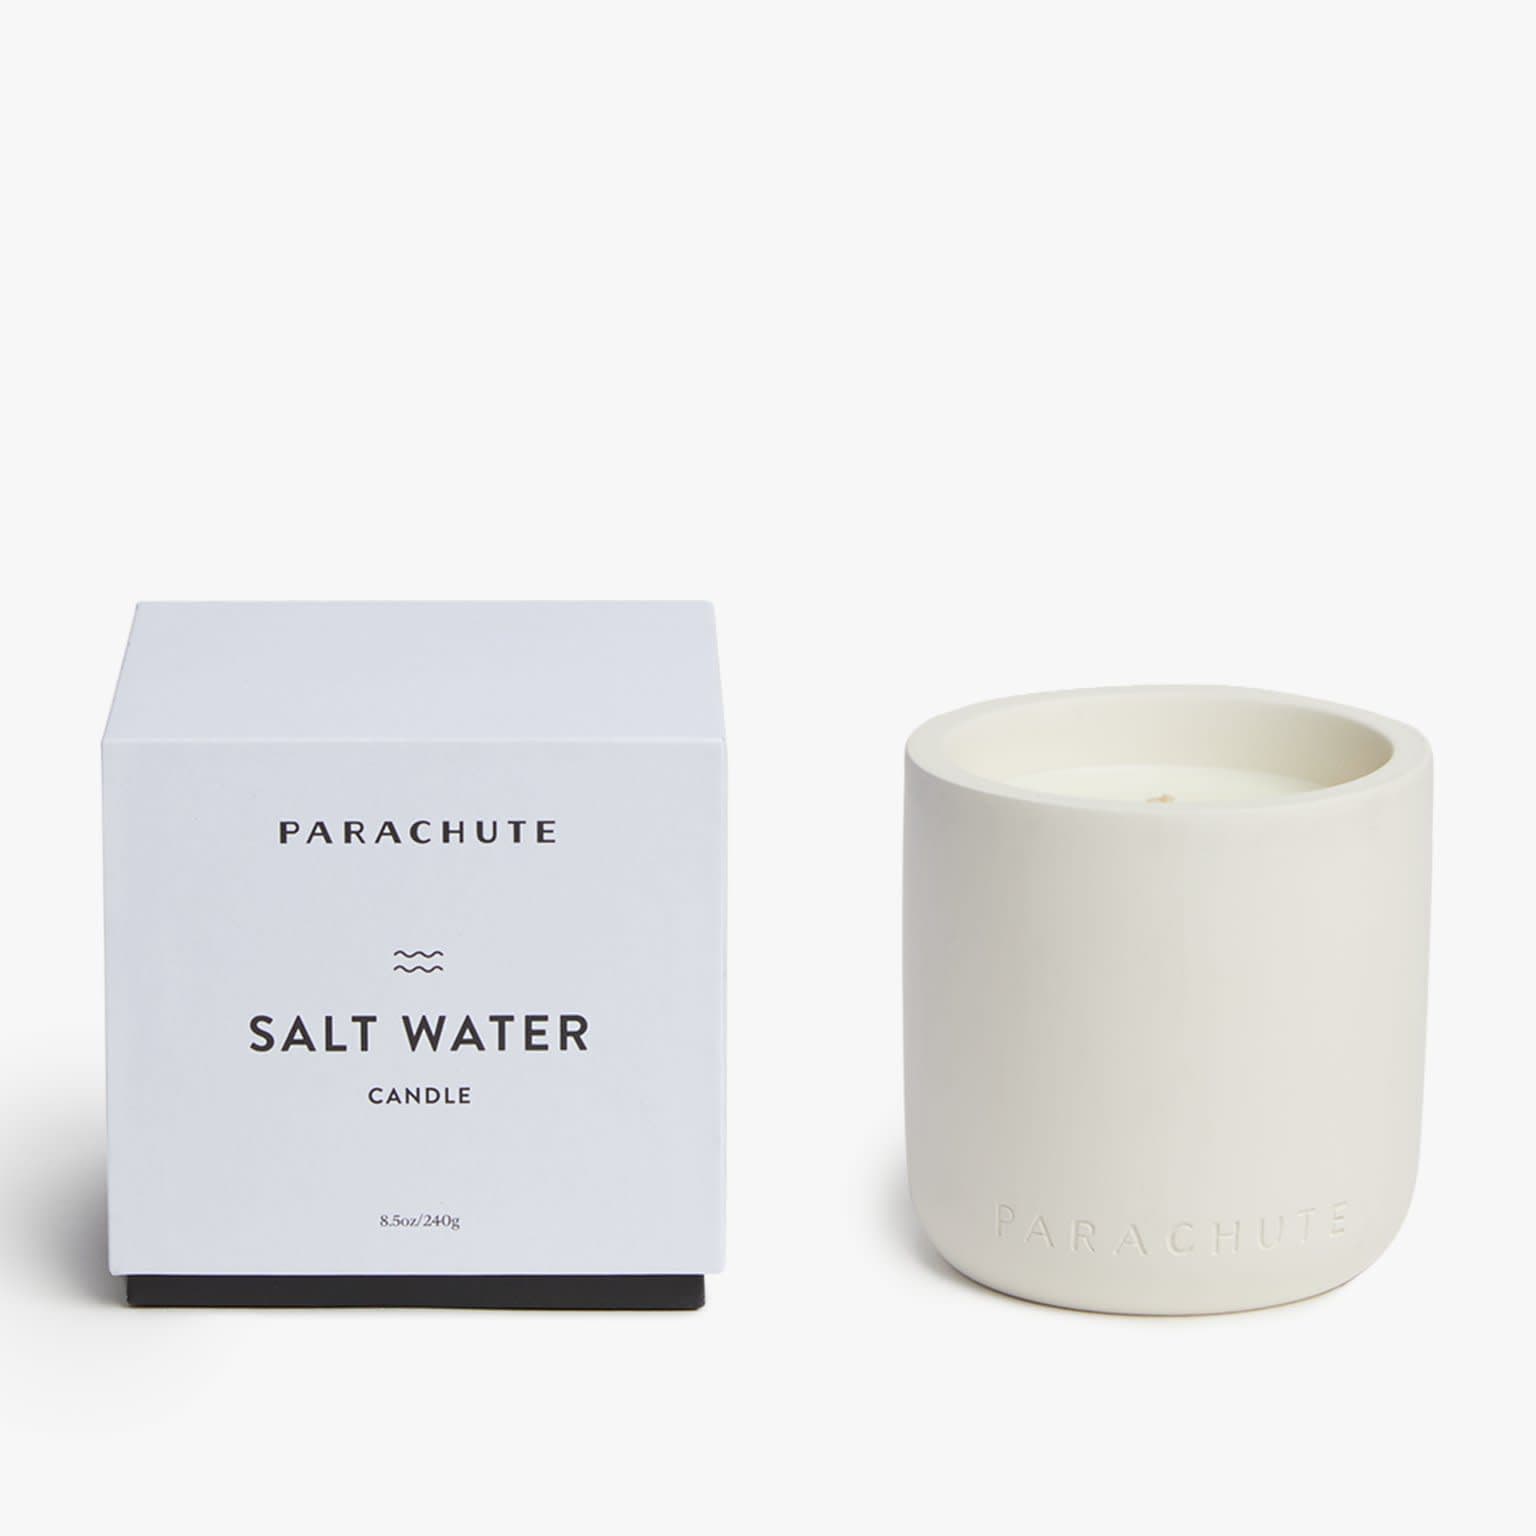 http://cdn.apartmenttherapy.info/image/upload/v1651188297/gen-workflow/product-database/scented-candle_salt-water-lightbox-parachute.jpg